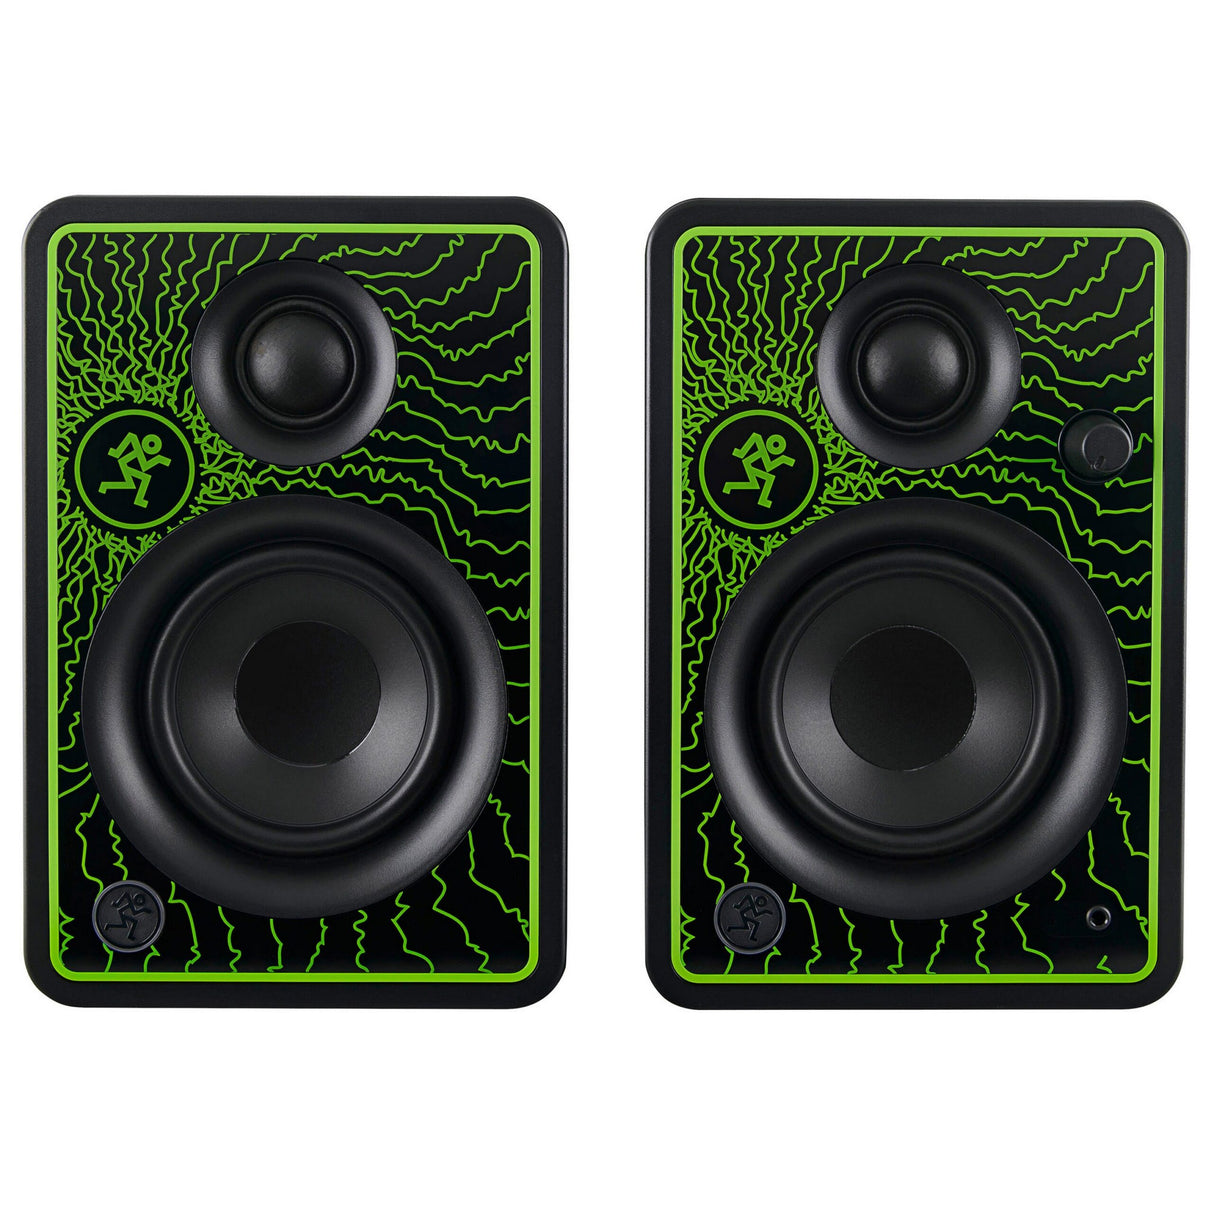 Mackie CR3-XLTD-GRN Creative Reference Series Multimedia Monitors, Pair, 3-Inch, Limited-Edition Green